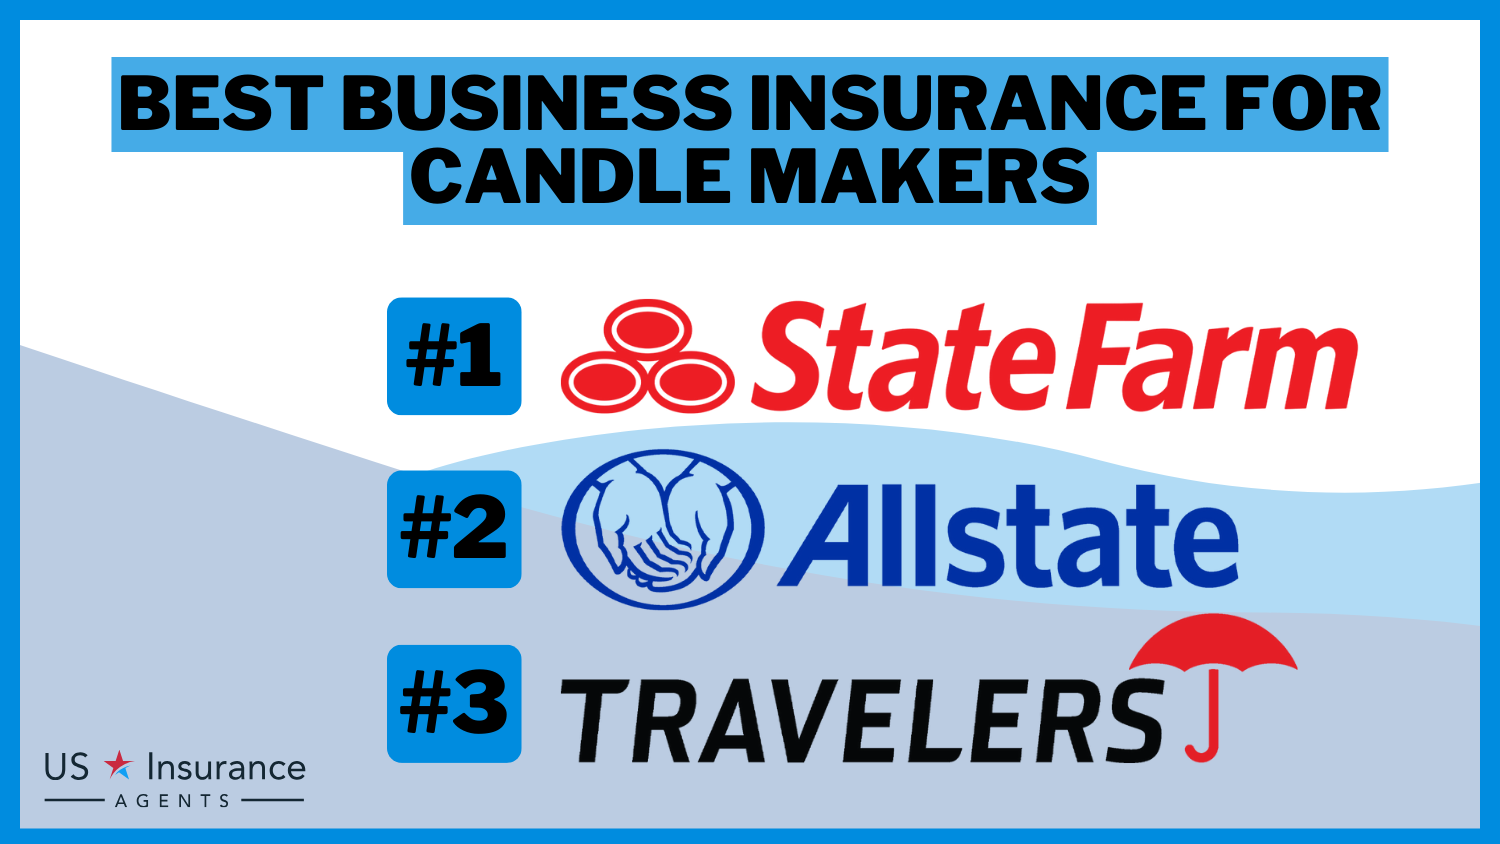 Best Business Insurance for Candle Makers